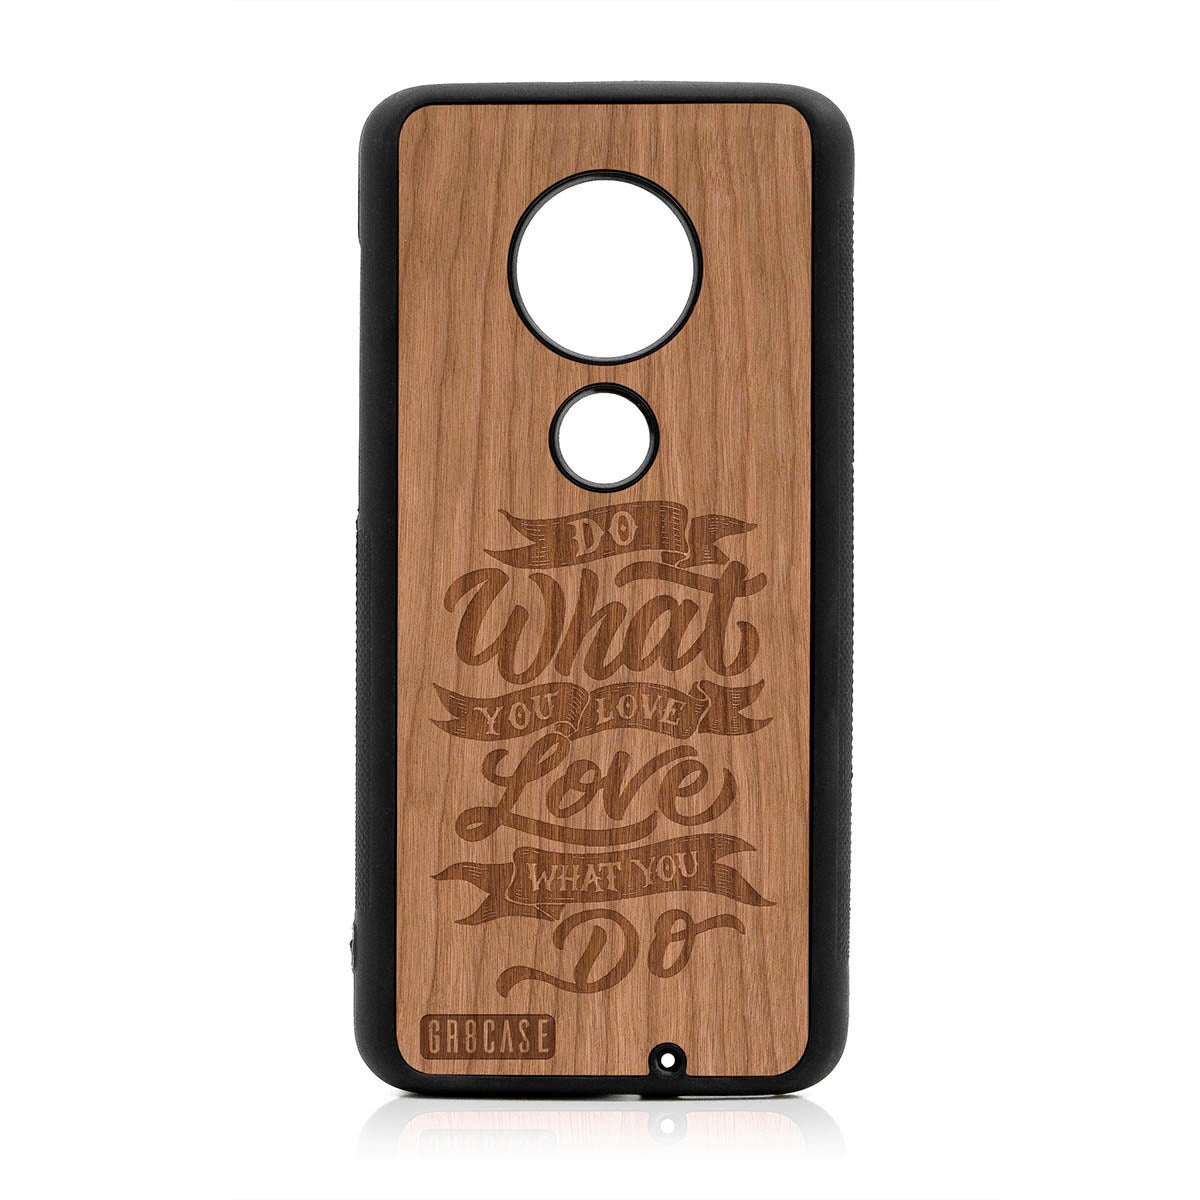 Do What You Love Love What You Do Design Wood Case For Moto G7 Plus by GR8CASE